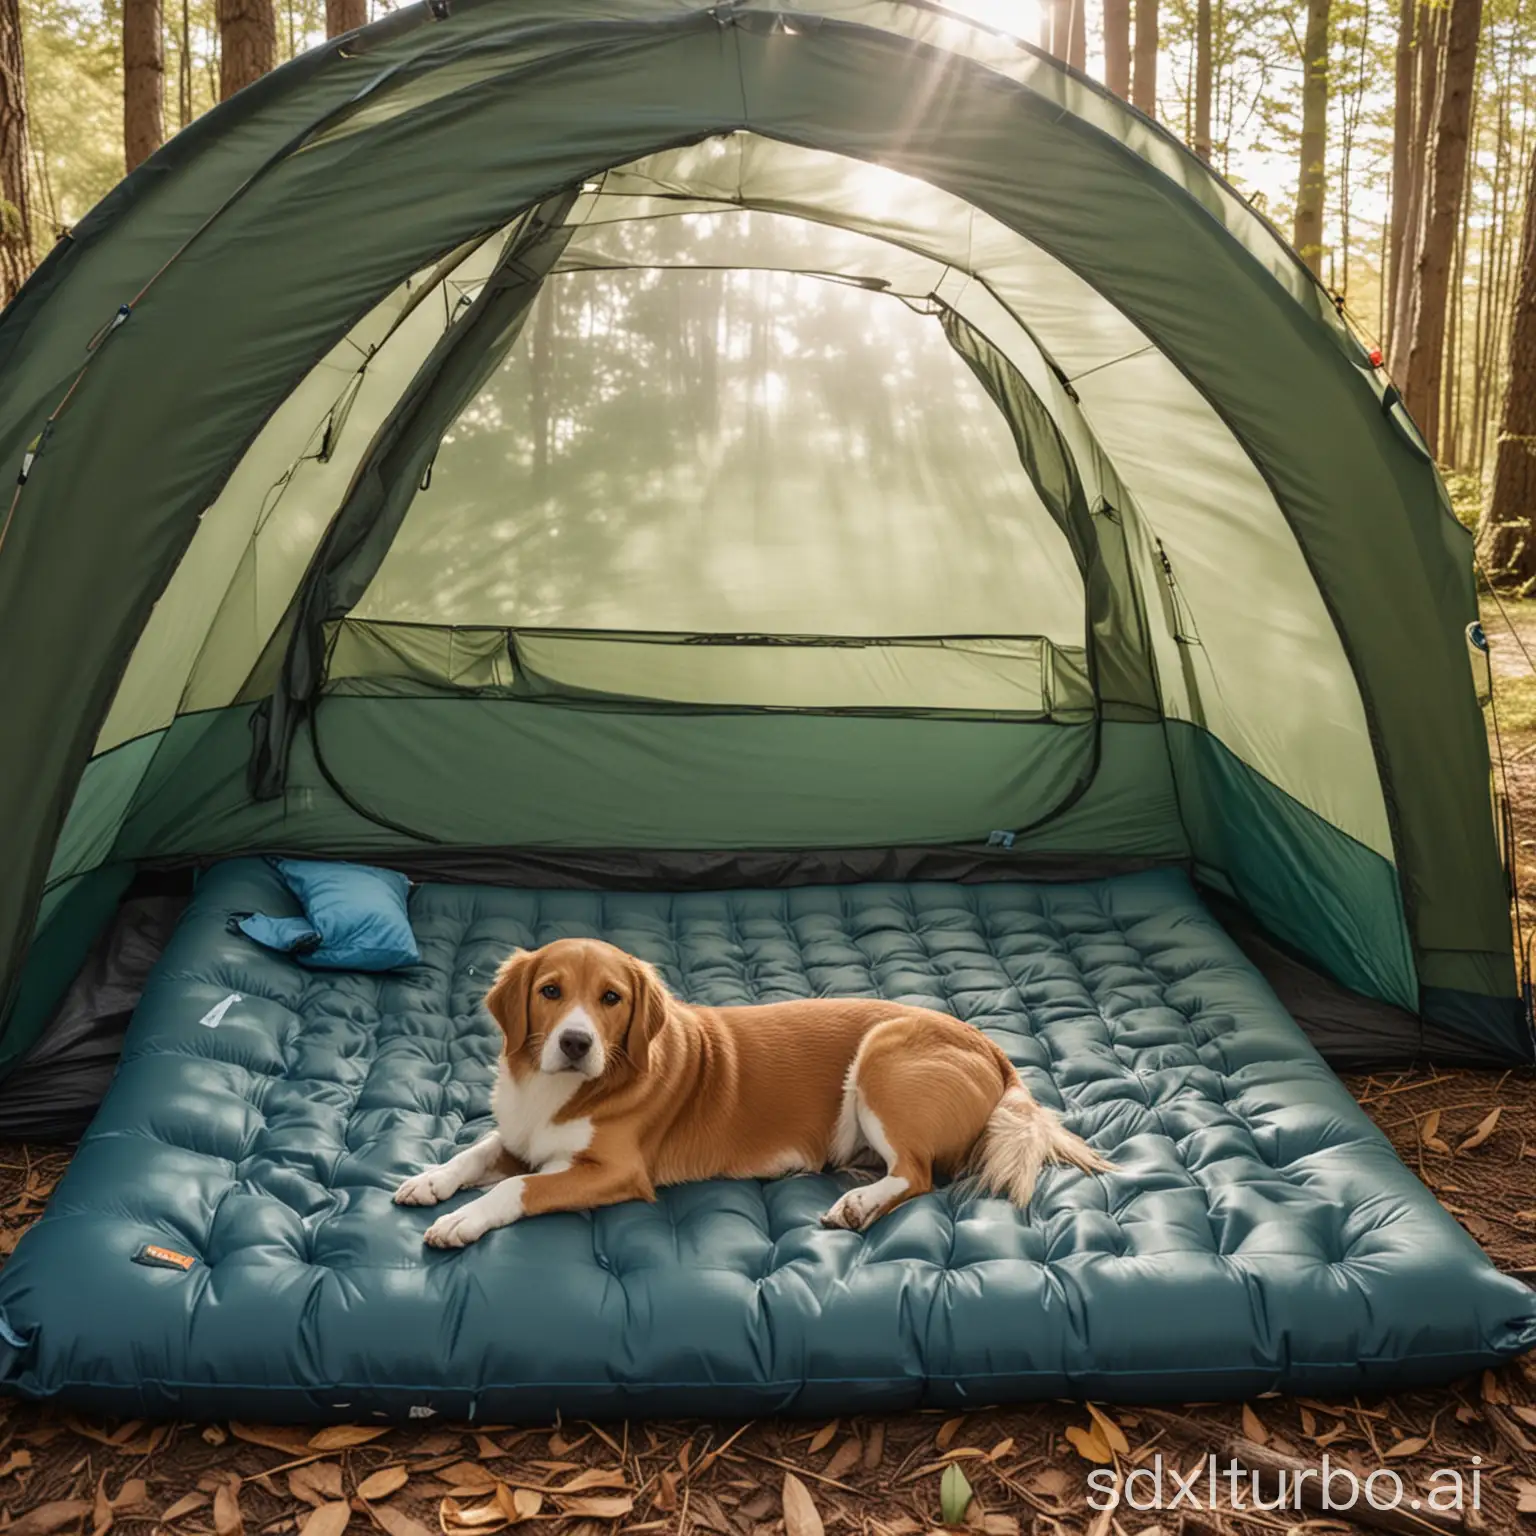 A peacock blue inflatable sleeping mat inside the tent. This sleeping mat comes with an air pillow. There are backpacks, quilts and other camping supplies inside the tent. There is a puppy sitting on the sleeping mat, looking outside the tent. The scenery outside the tent is very beautiful. , there are woods, streams and sunshine